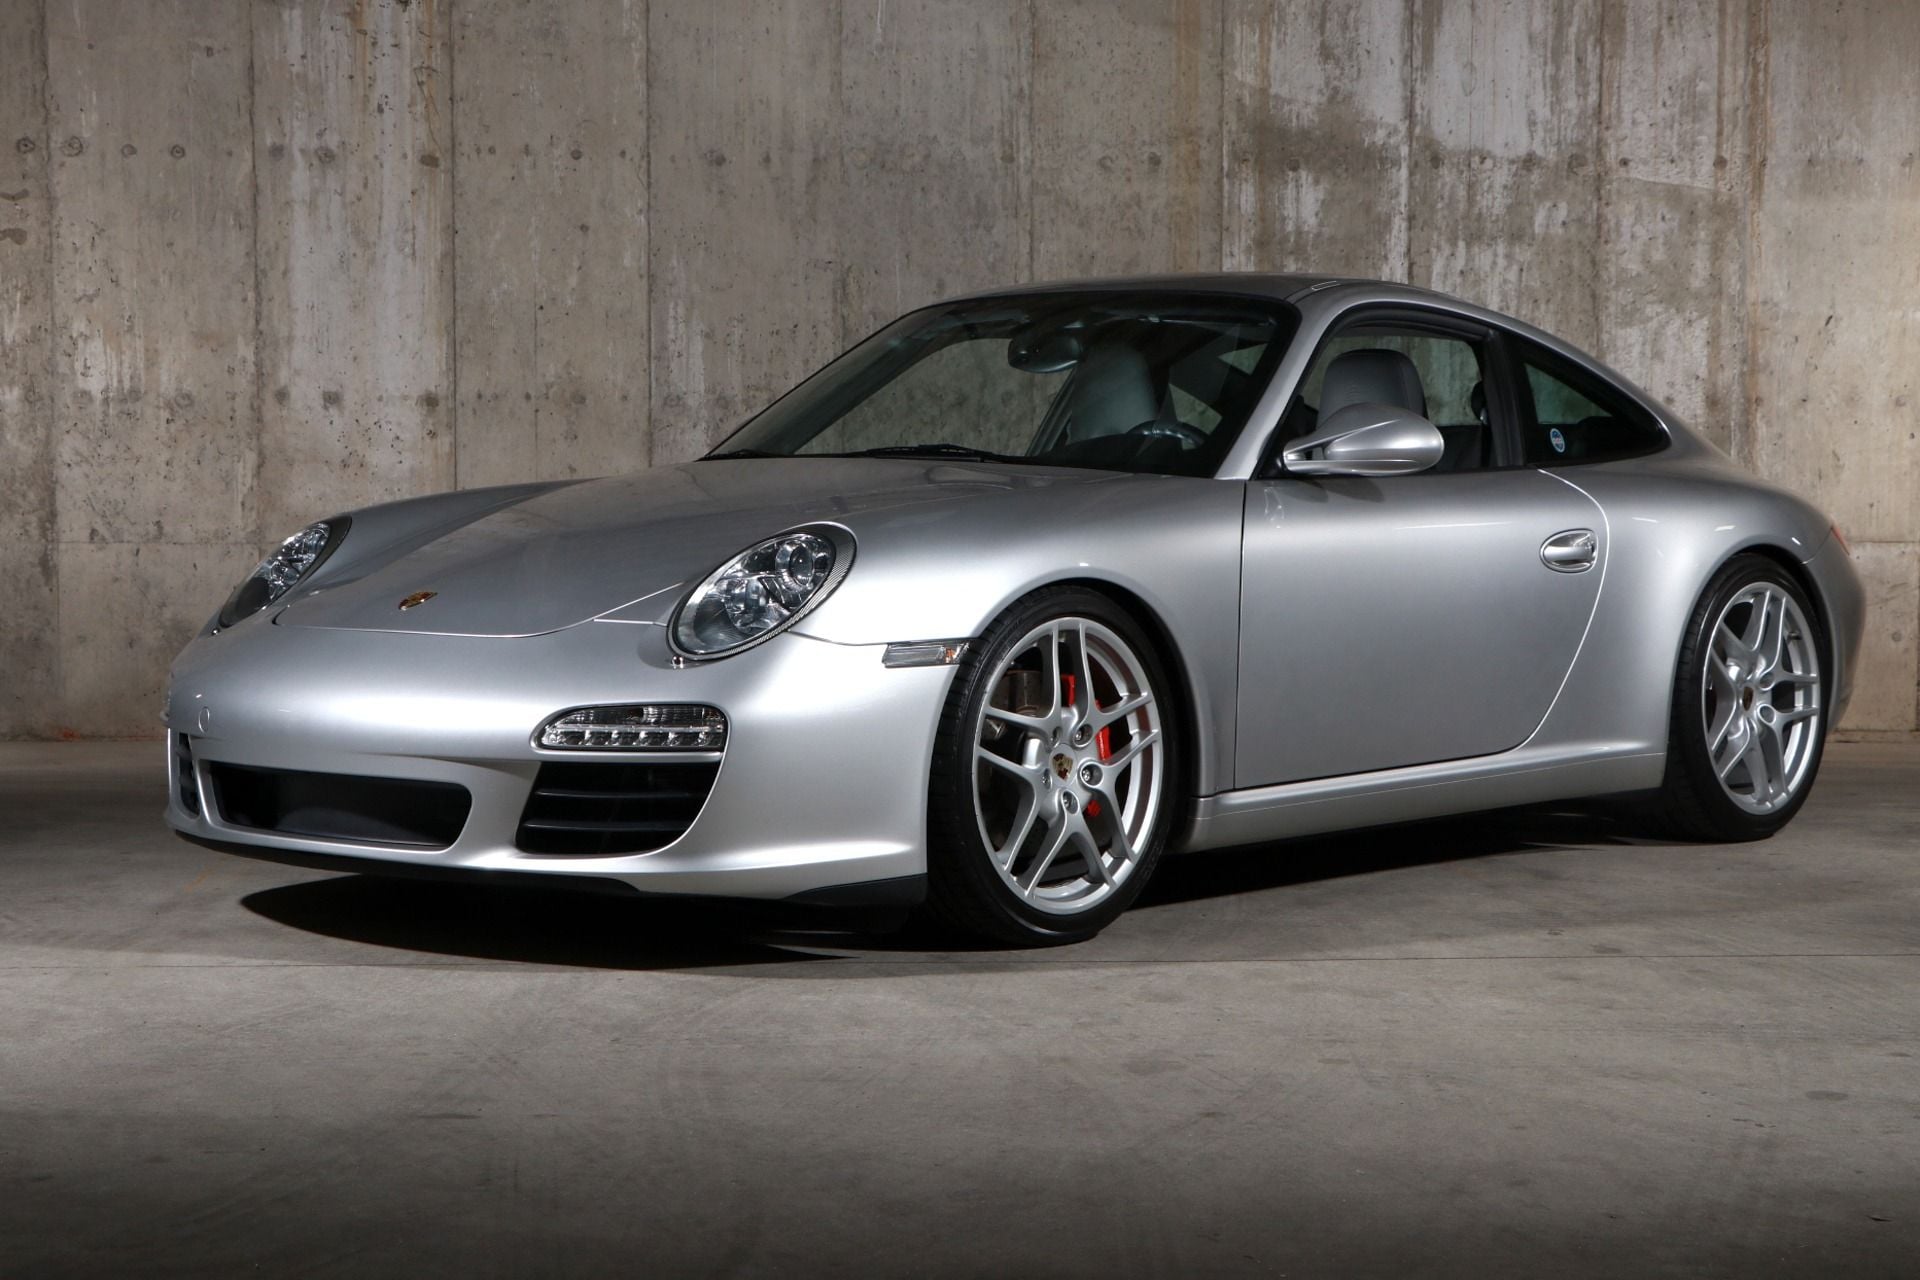 2009 - 2012 Porsche 911 - WTB: 997.2 c2s 6 speed - Used - 20,000 Miles - 6 cyl - 2WD - Manual - Coupe - Grand Rapids, MI 49503, United States